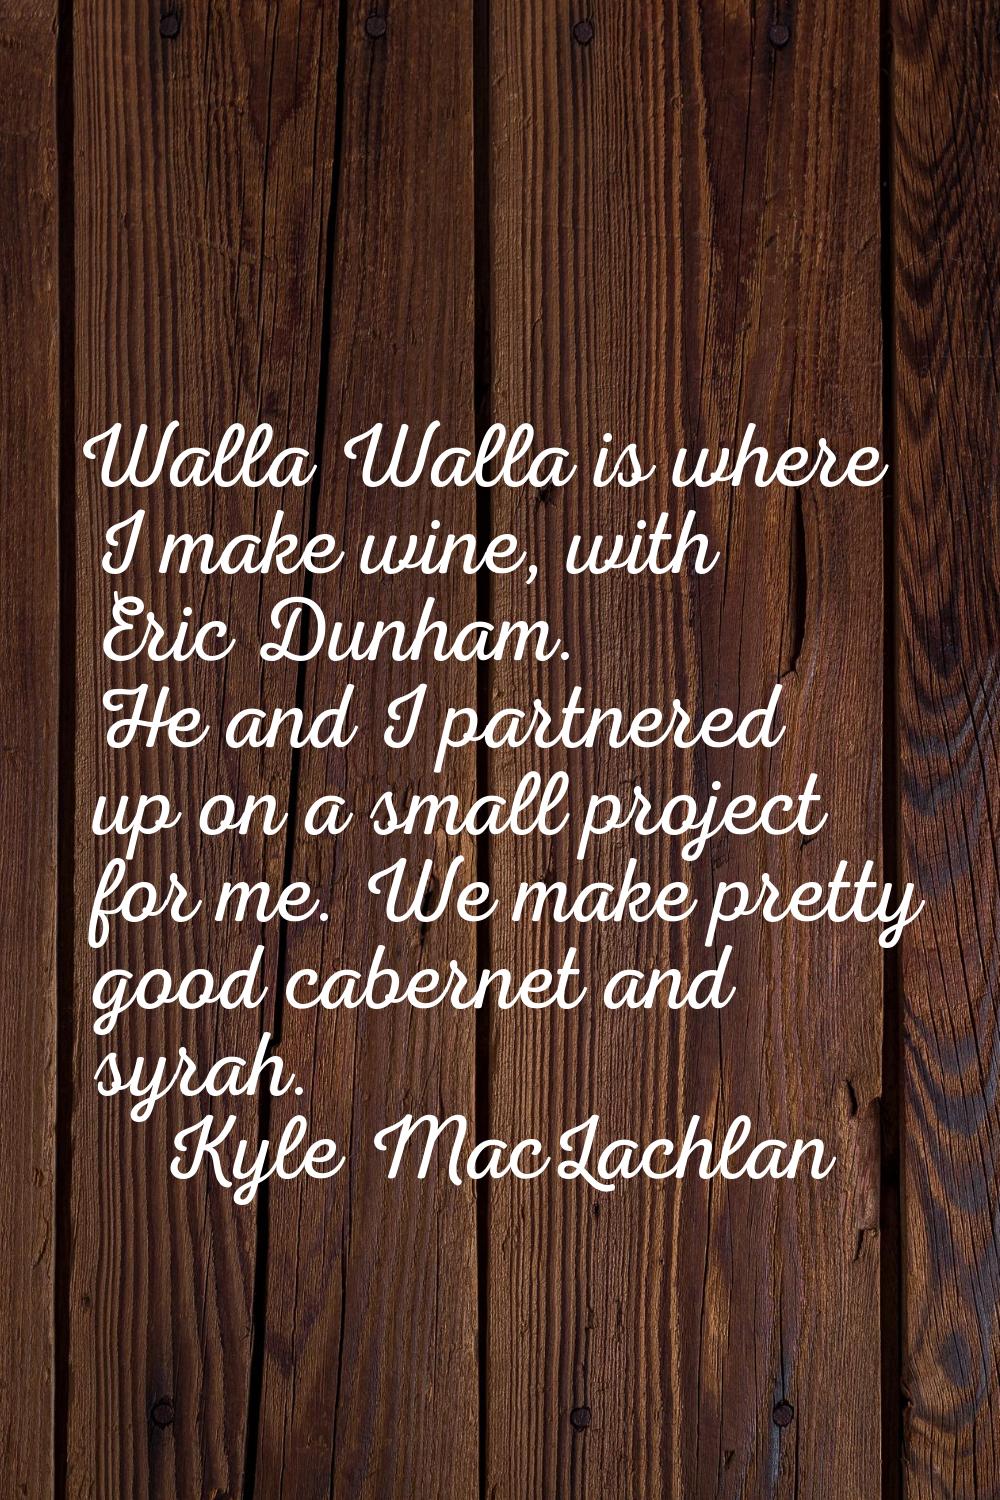 Walla Walla is where I make wine, with Eric Dunham. He and I partnered up on a small project for me